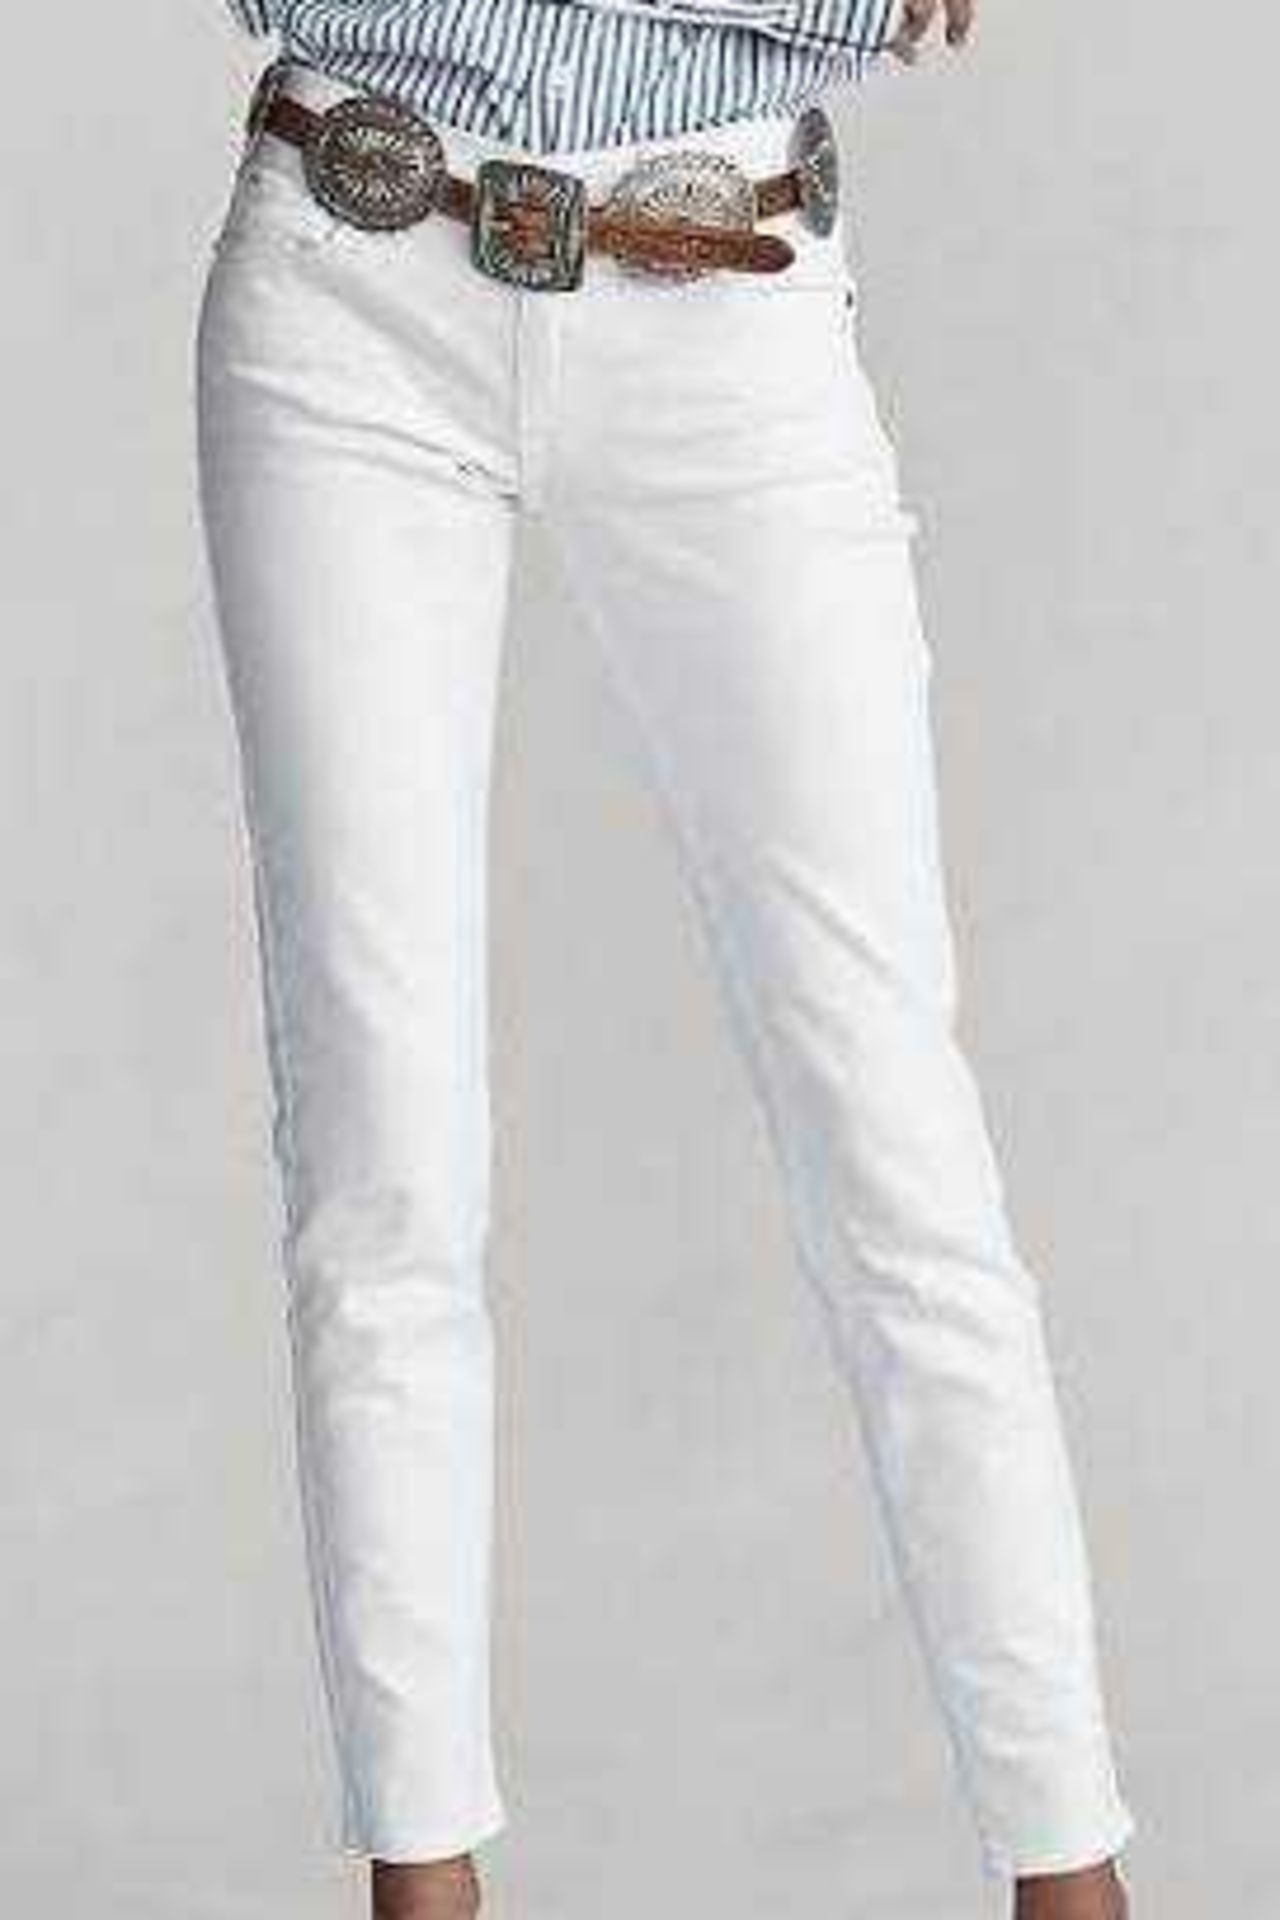 RRP £125 Bagged Pair Of Polo Ralph Lauren Skinny Fit White Denim Jeans